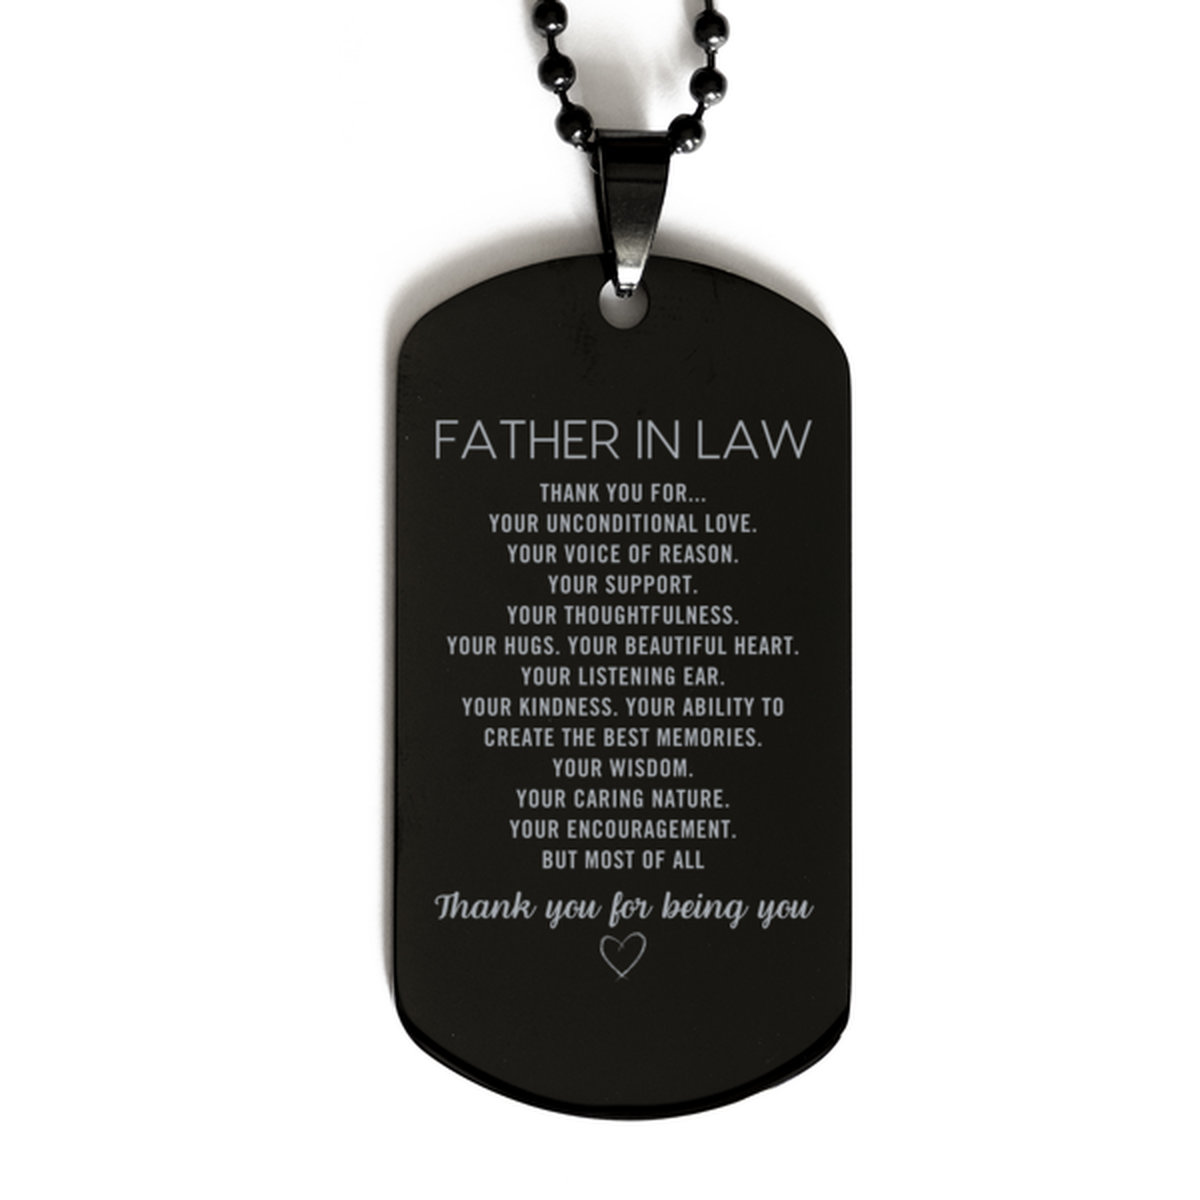 Father In Law Black Dog Tag Custom, Engraved Gifts For Father In Law Christmas Graduation Birthday Gifts for Men Women Father In Law Thank you for Your unconditional love